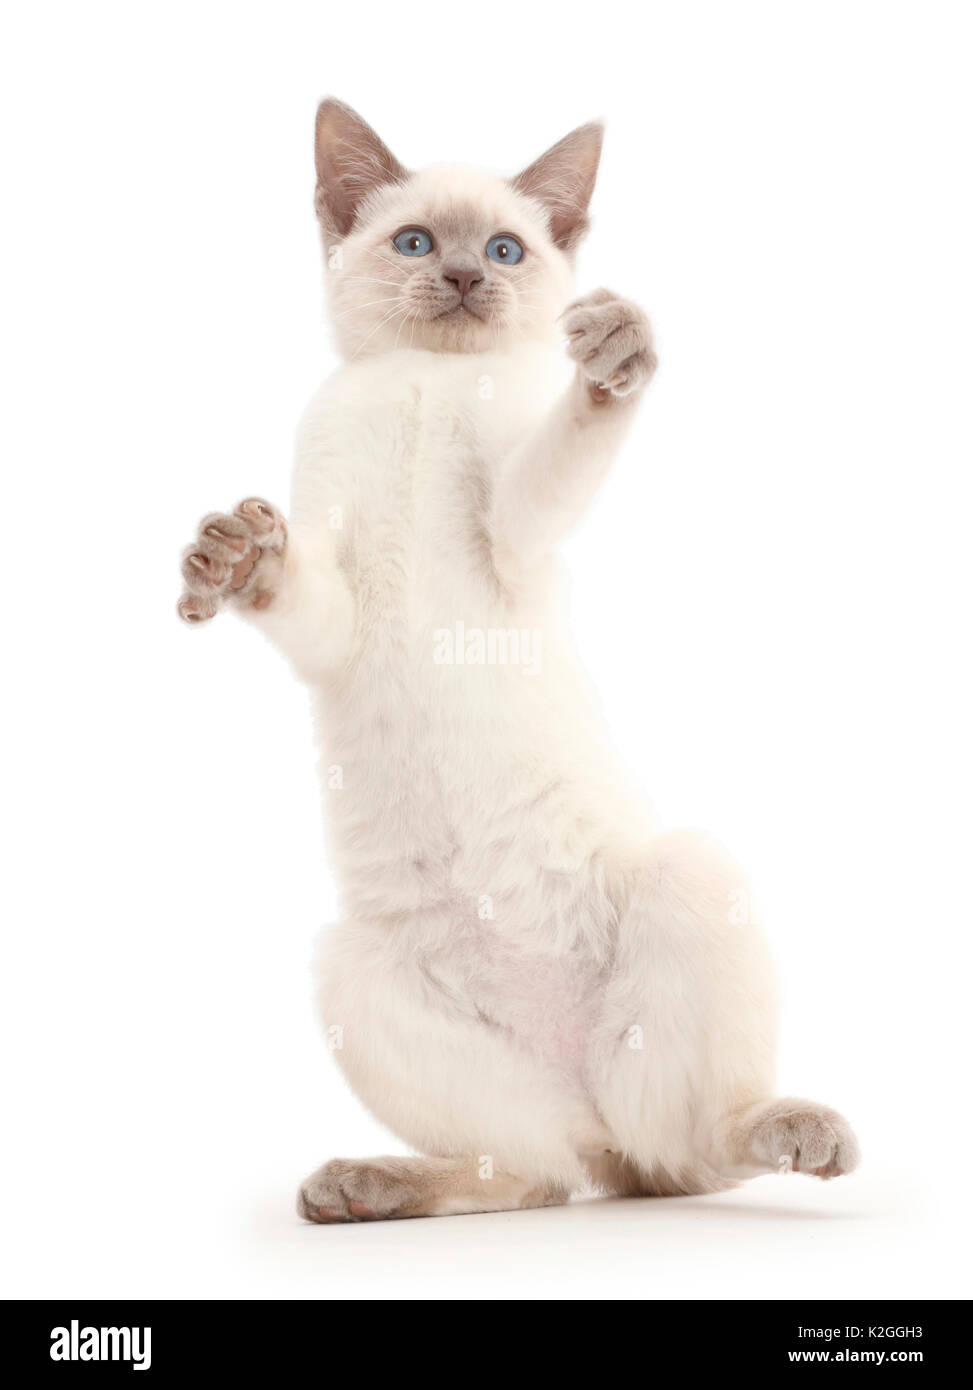 Blue-point kitten playing, standing on hind legs. Stock Photo